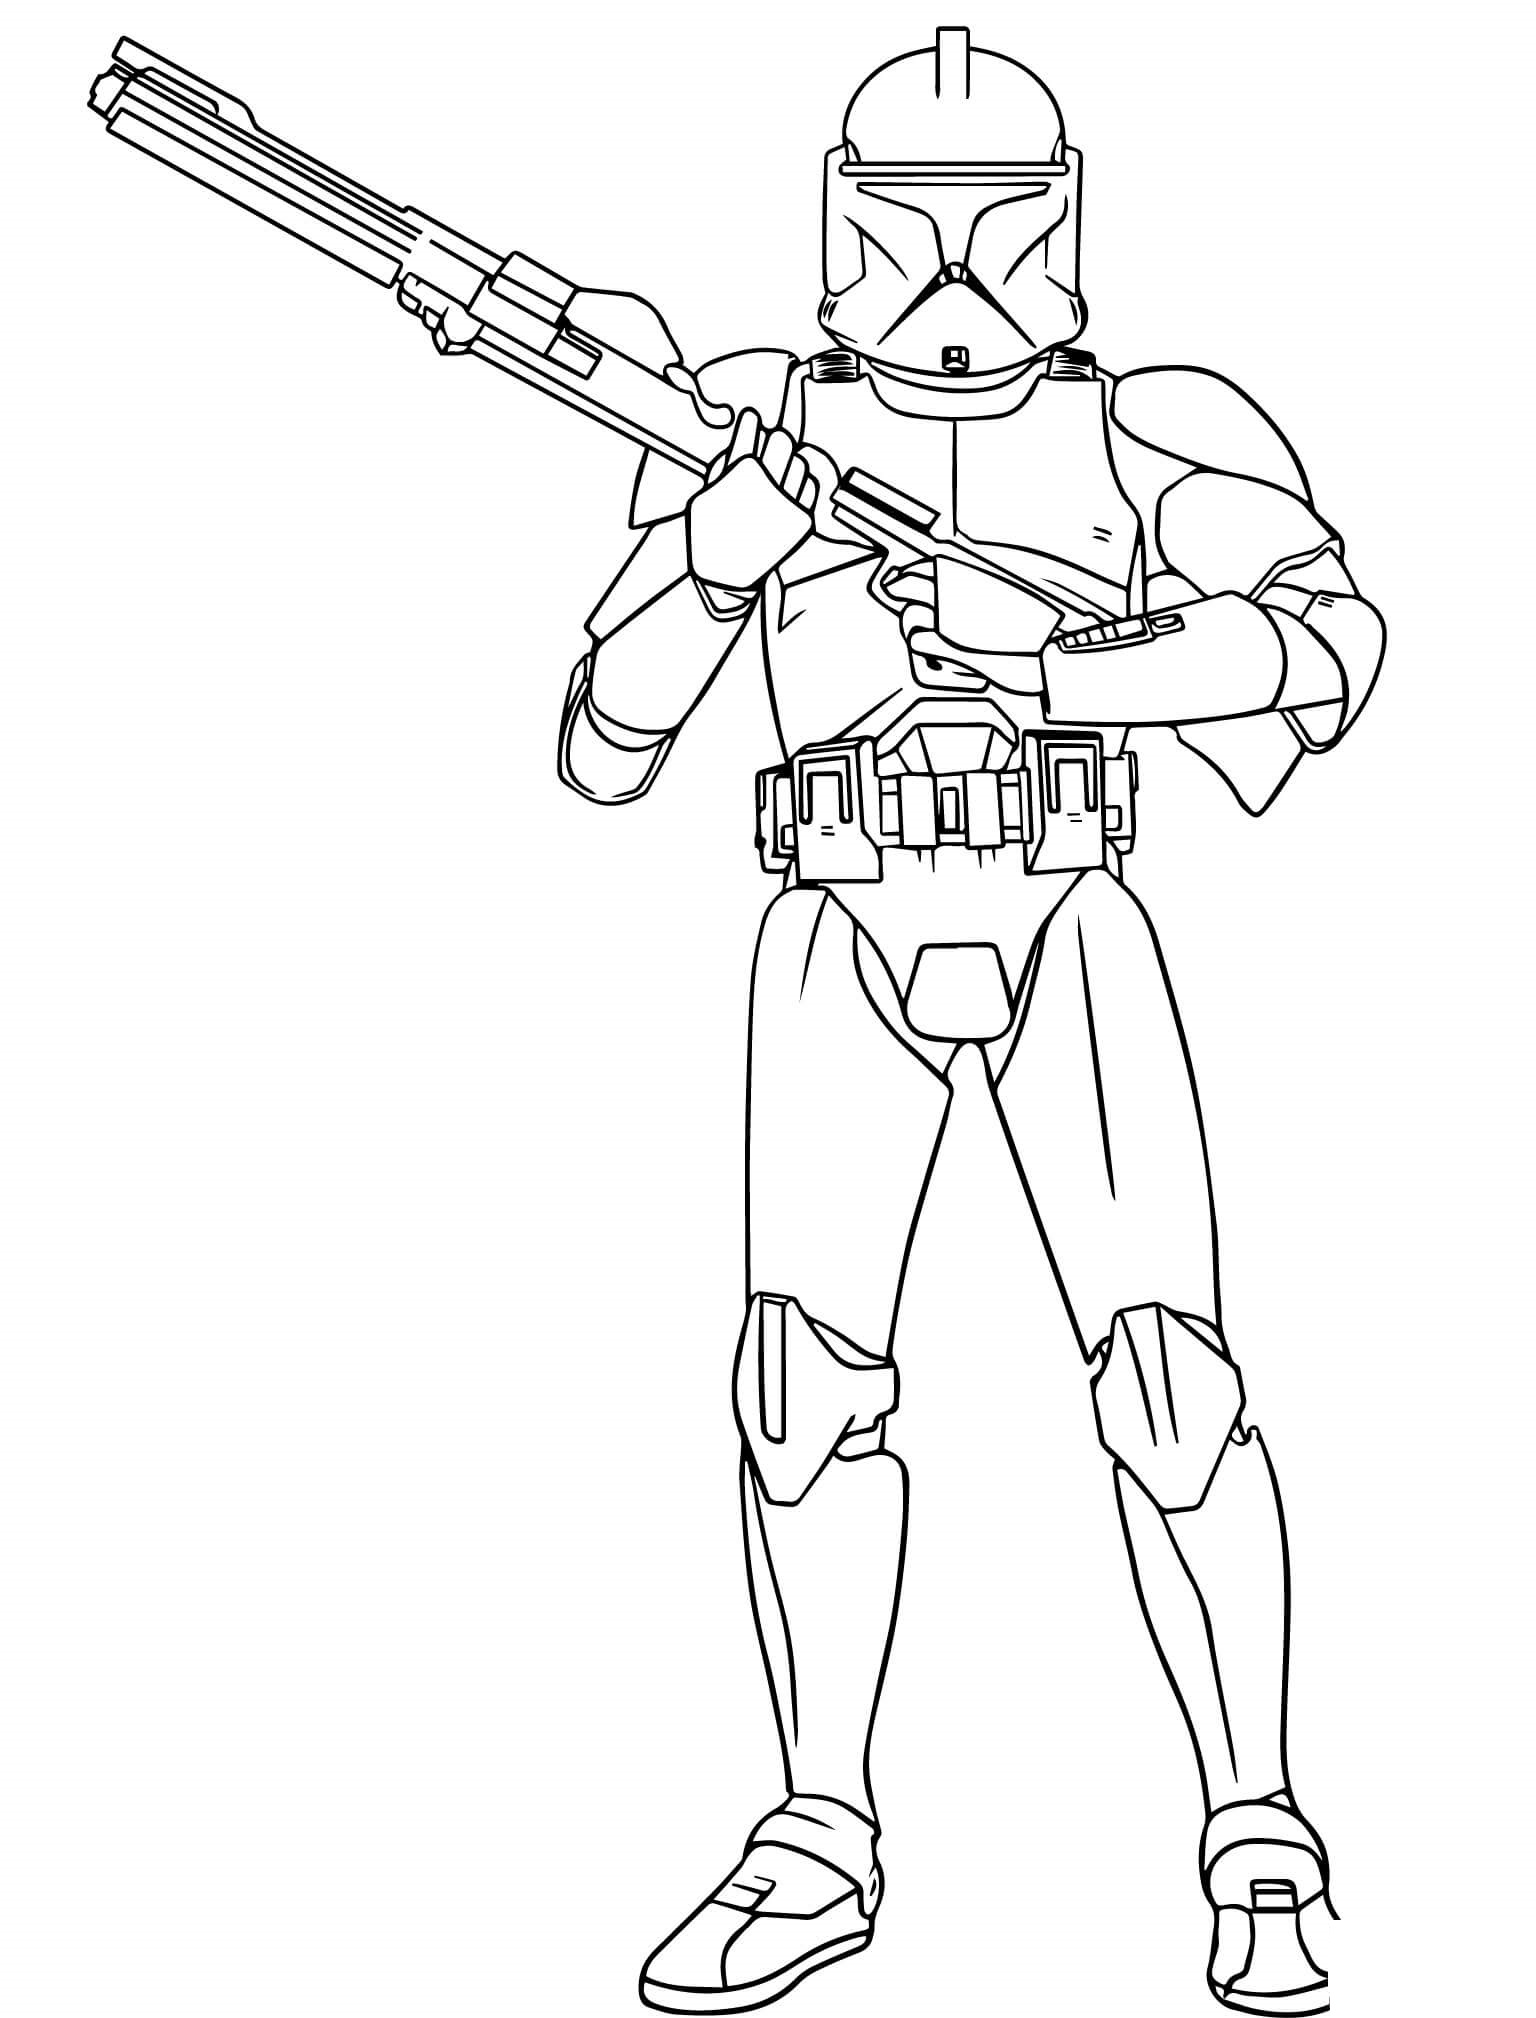 Star wars boba fett Movies Adult Coloring Pages. 